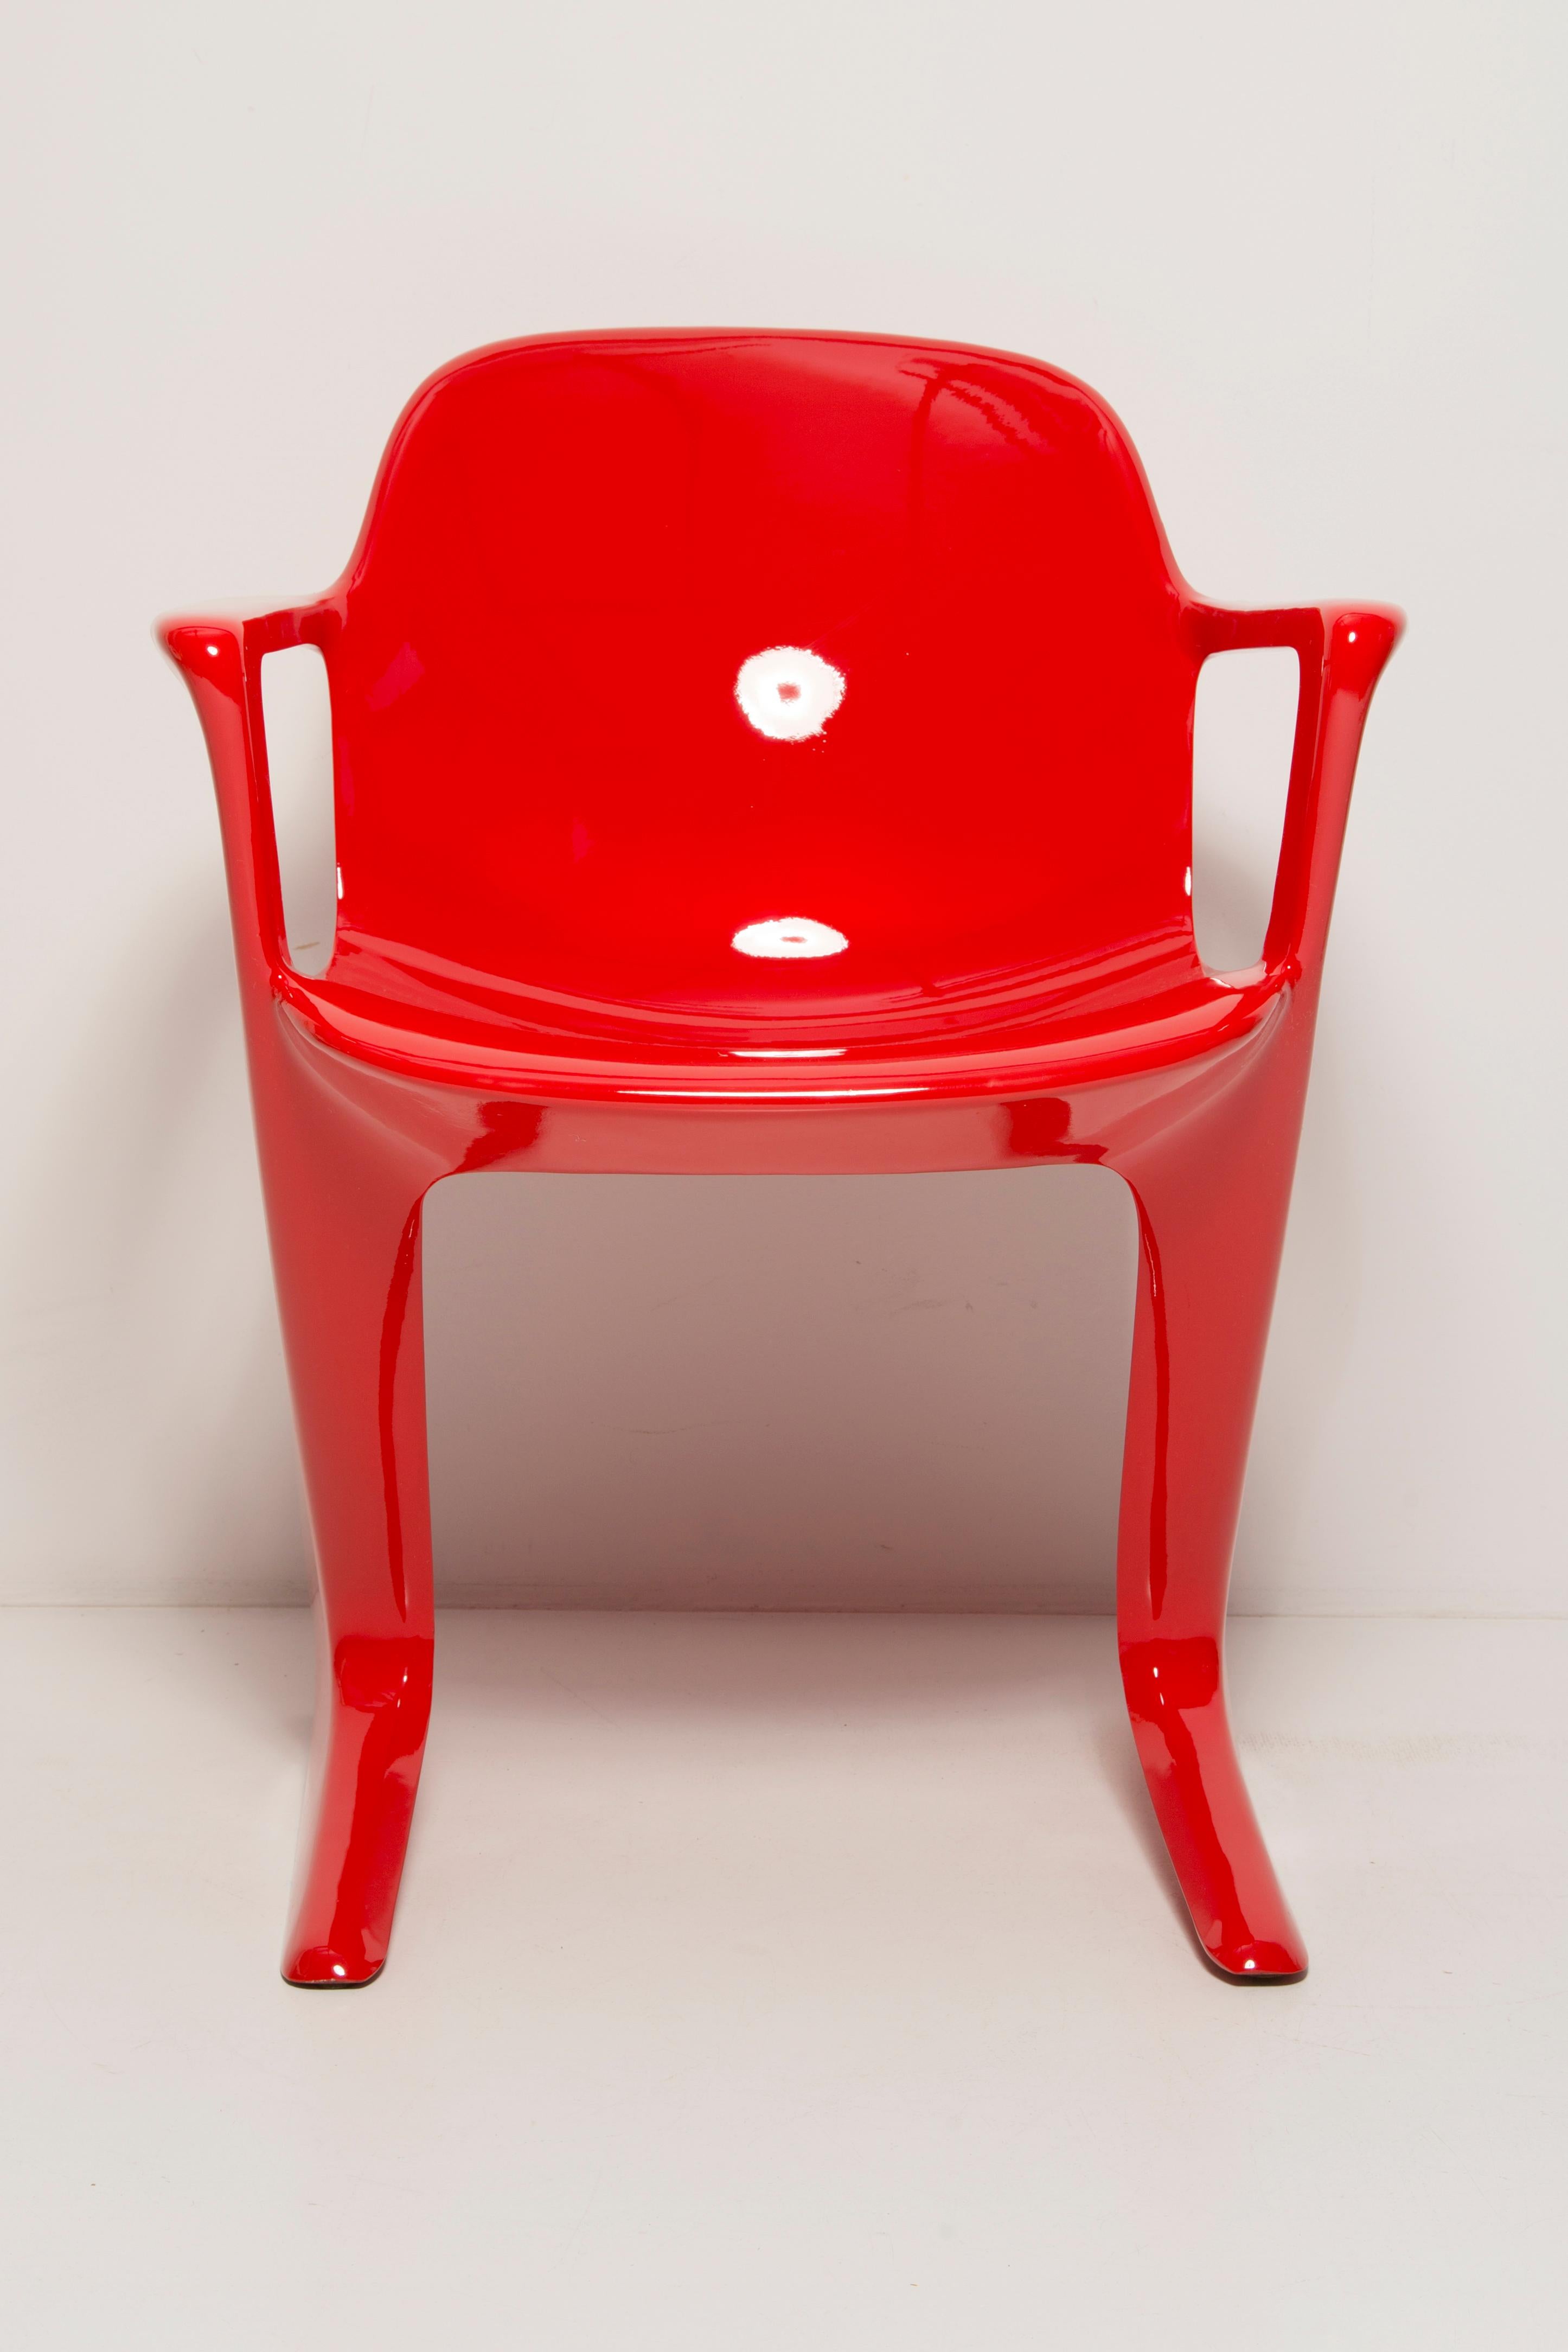 Midcentury Signal Red Kangaroo Chair Designed by Ernst Moeckl, Germany, 1968 For Sale 4